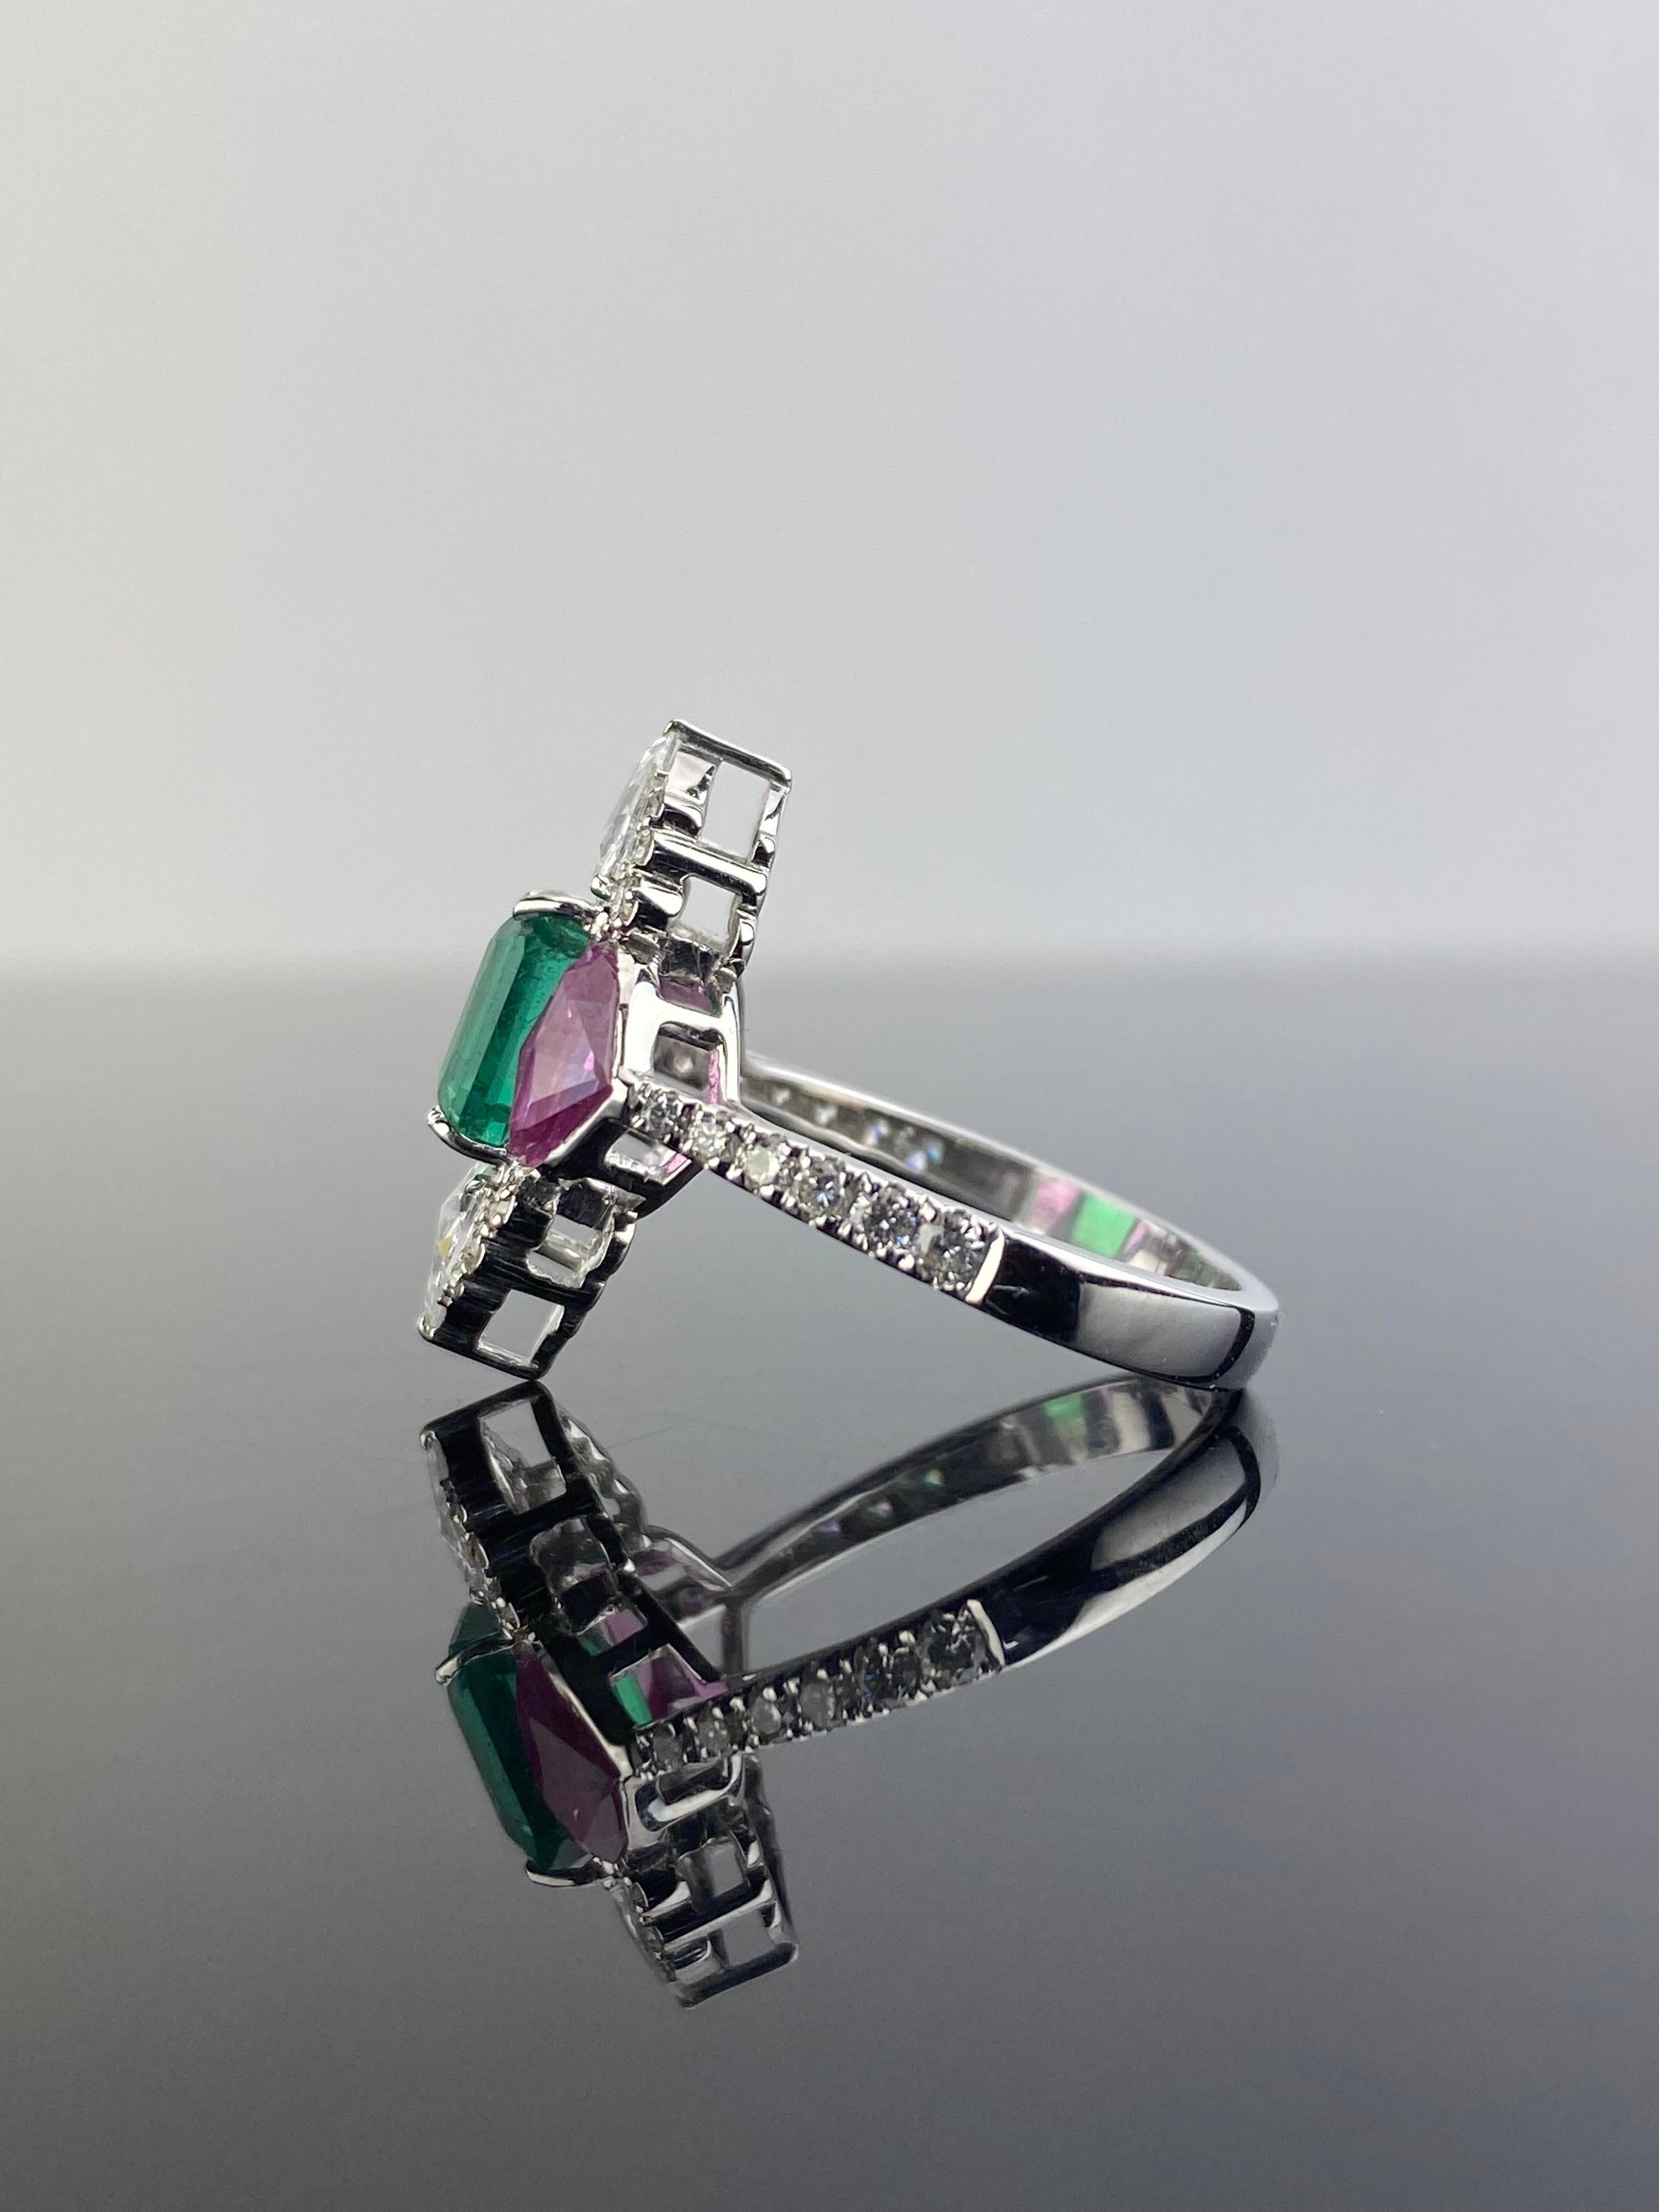 A stunning art-deco vibe, 1.86 carat Zambian Emerald center stone with 2 custom cut Pink Sapphire side stones and White Diamond engagement ring, set in solid 18K White Gold. The ring is currently sized at US 6, can be resized. The Emerald is